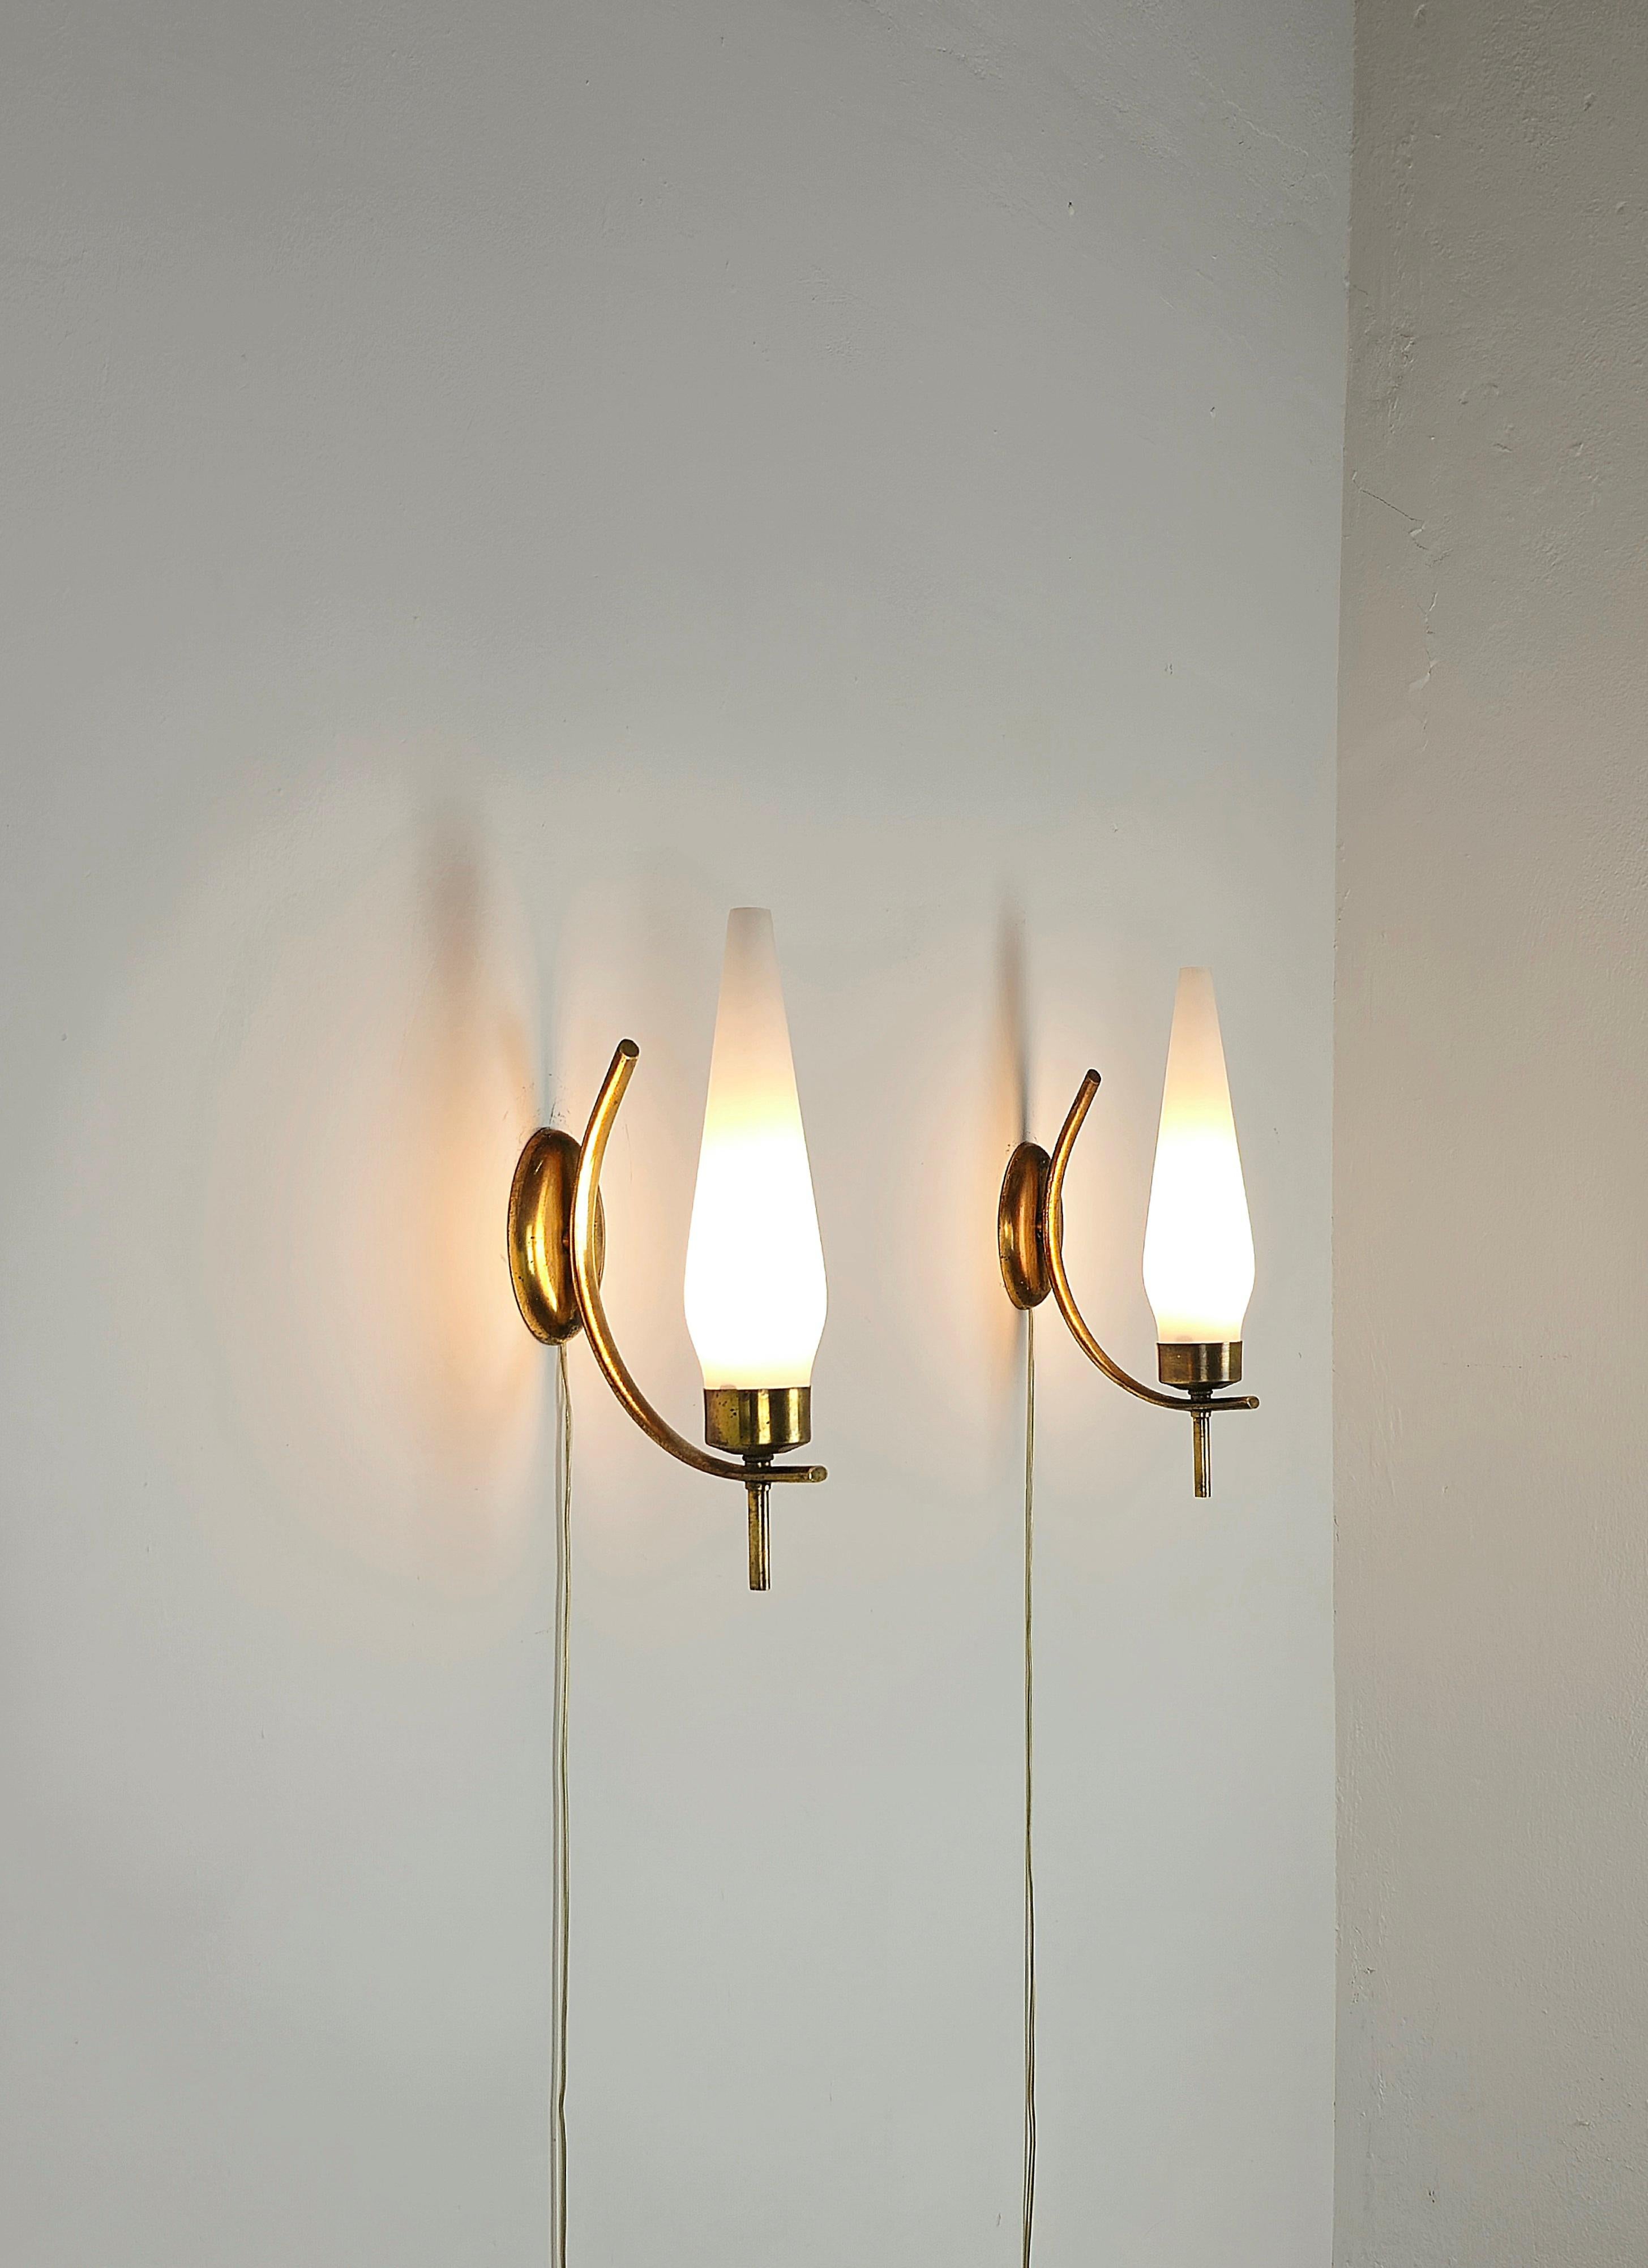 Pair of Wall Lights Sconces Brass Opaline Glass Midcentury Italian Design 1960s  For Sale 3